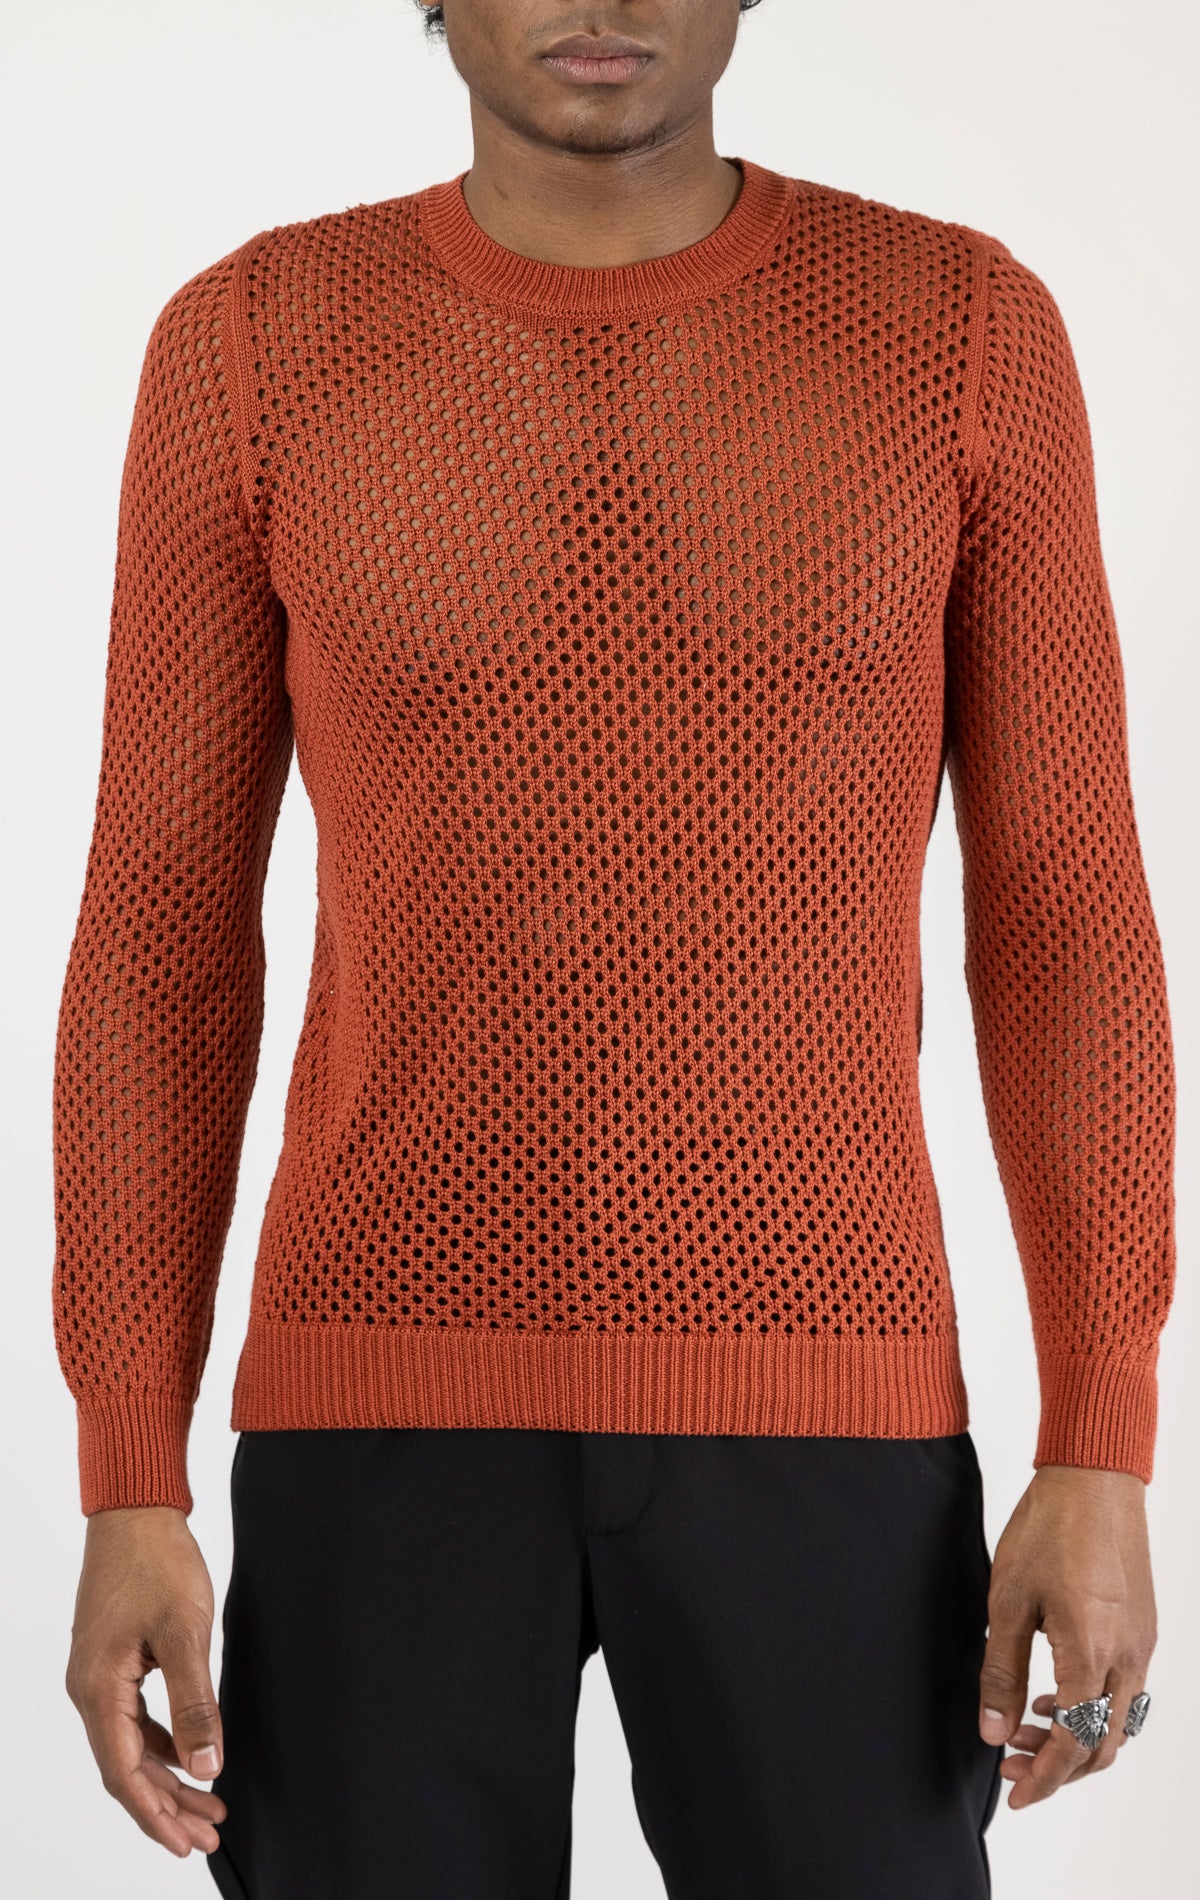 Men's see-through fishnet muscle fit shirt in copper. The shirt is made from a 50% cotton, 50% acrylic blend and features a muscle fit silhouette with a see-through fishnet fabric design.